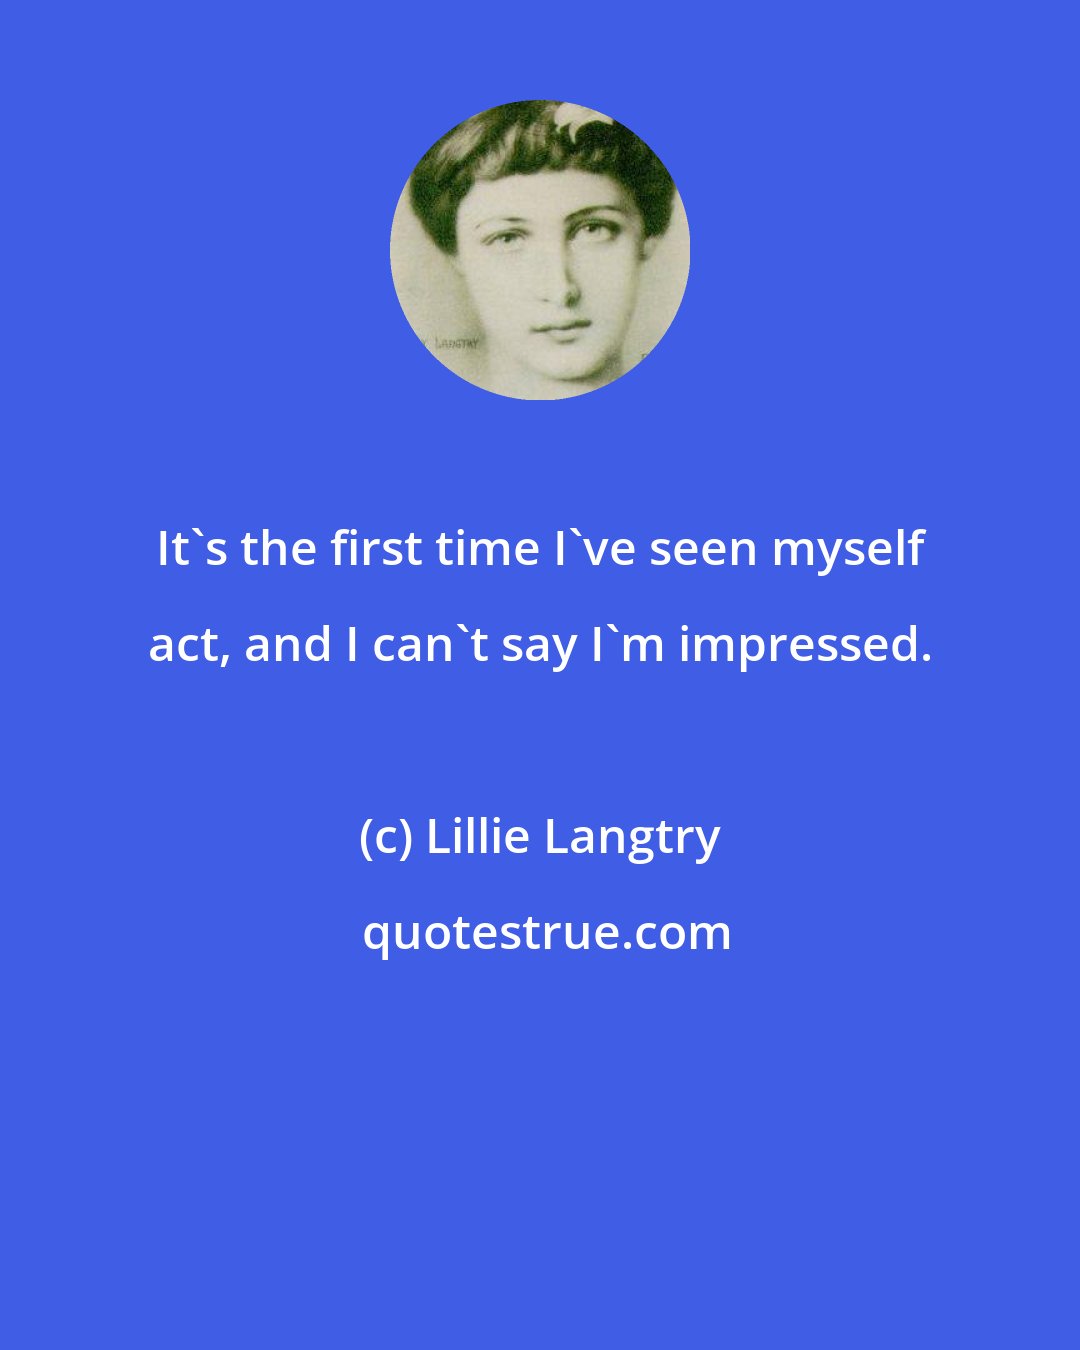 Lillie Langtry: It's the first time I've seen myself act, and I can't say I'm impressed.